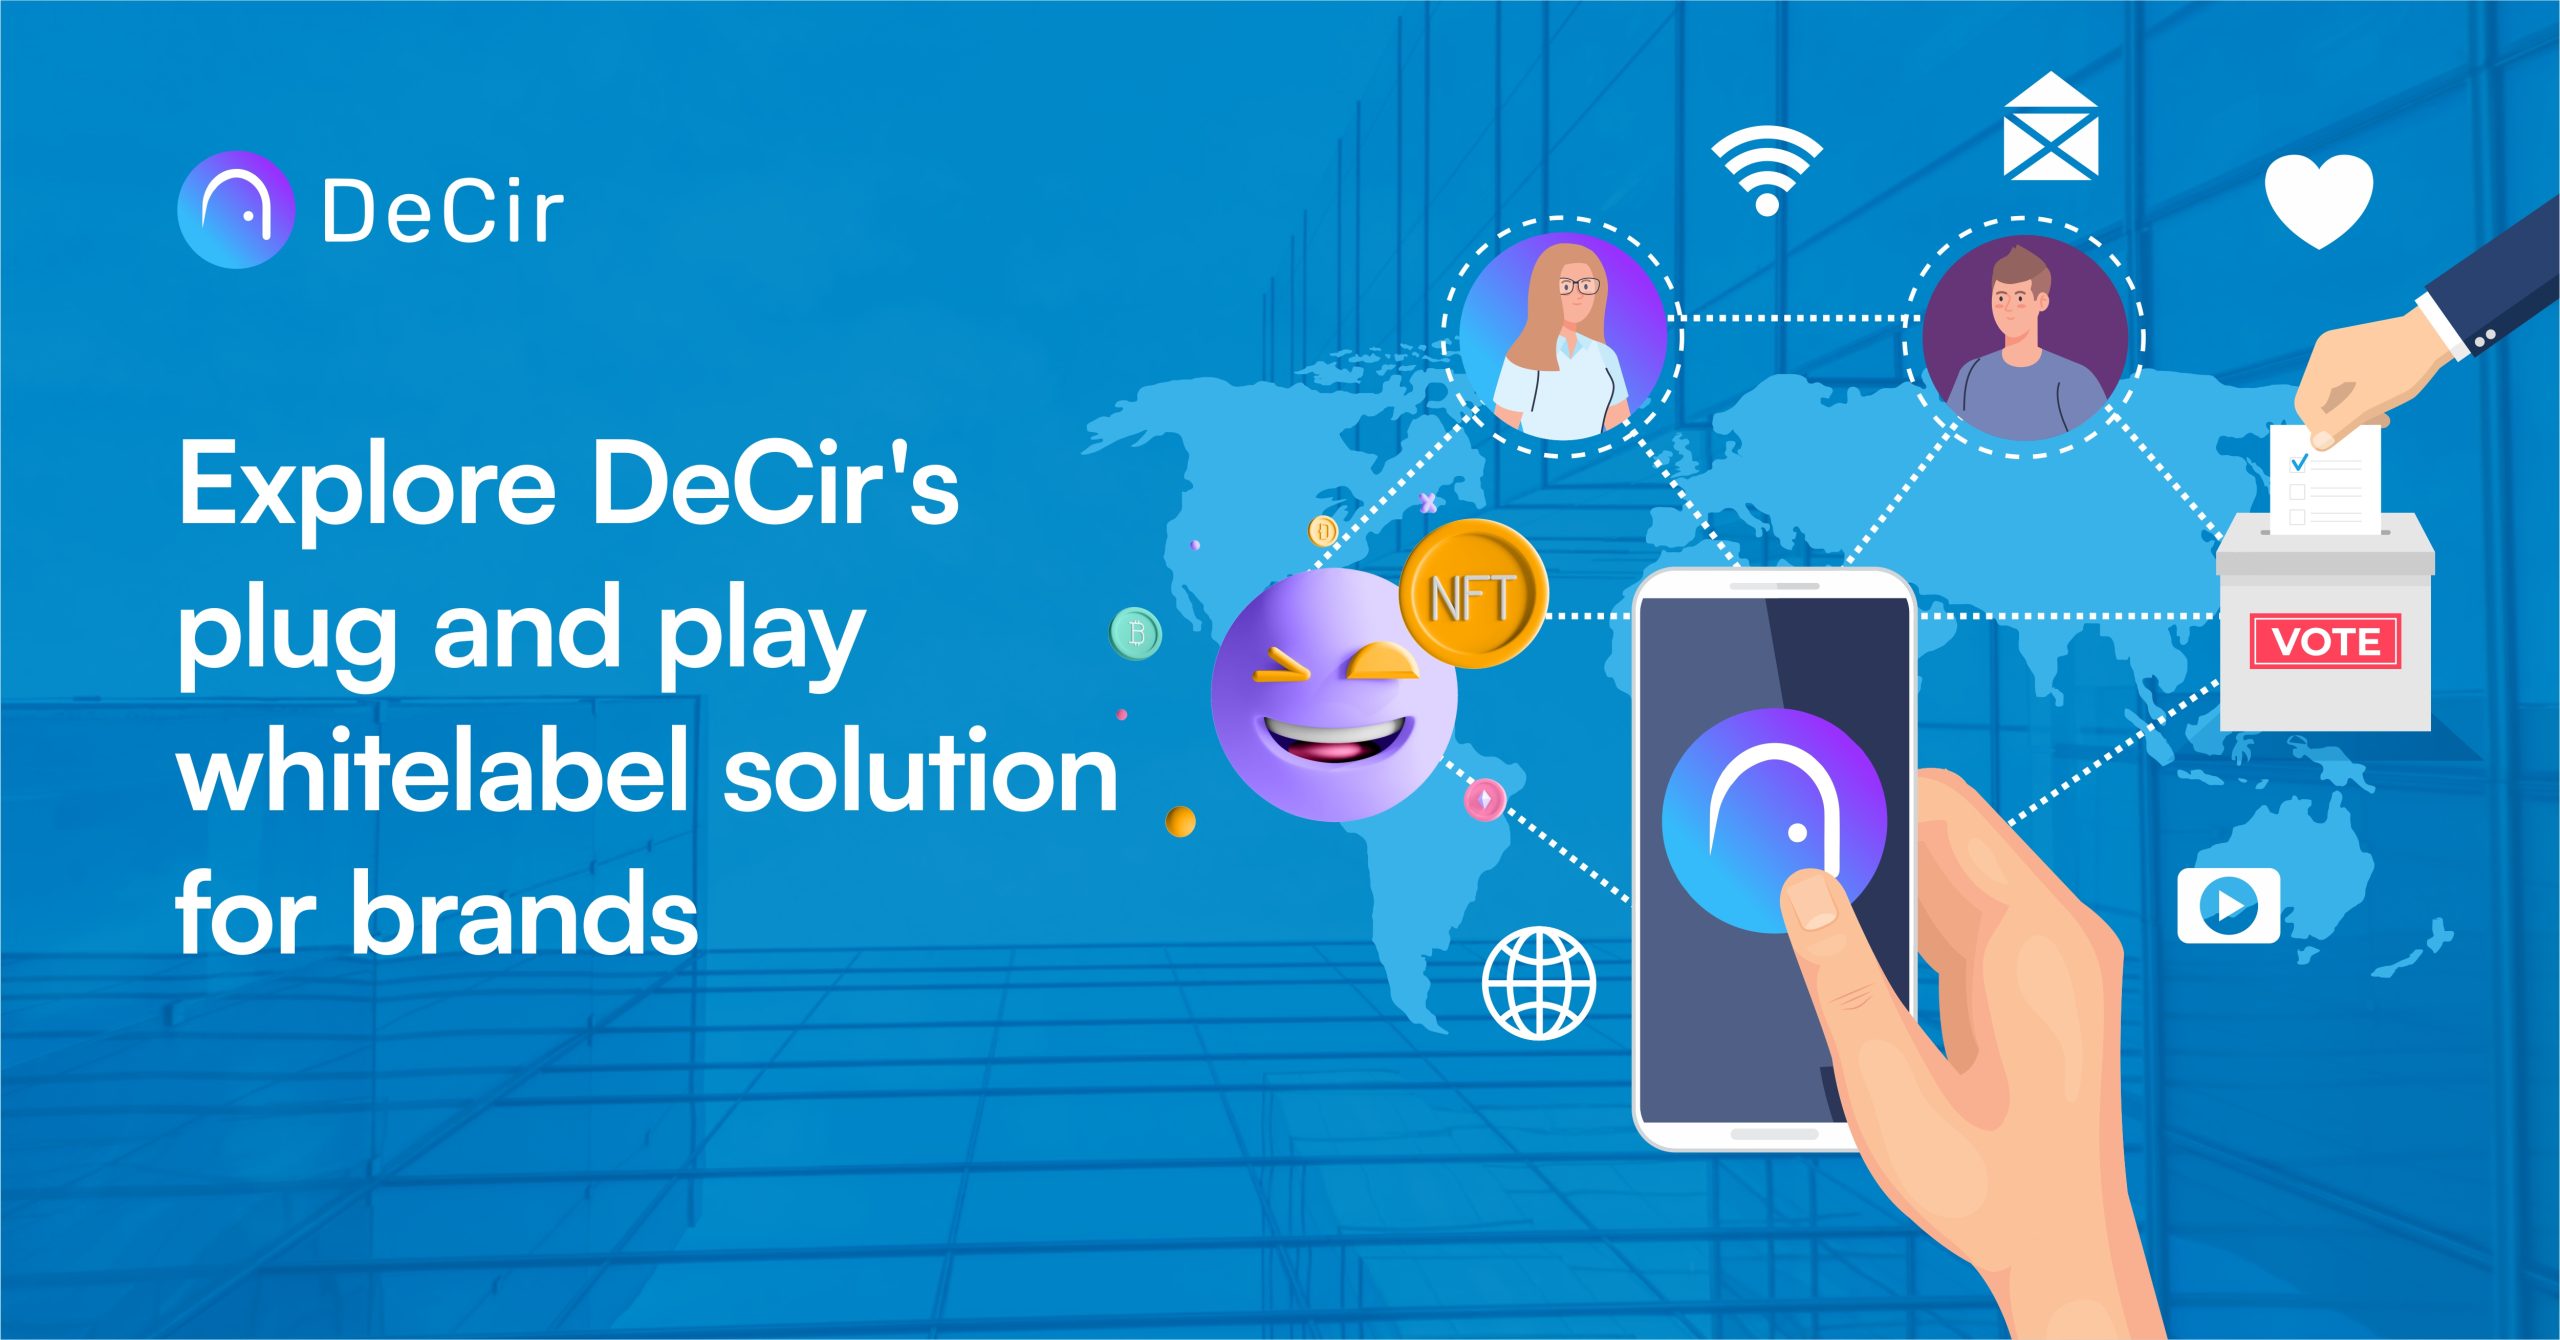 Explore DeCir's Plug-and-Play solution for brands